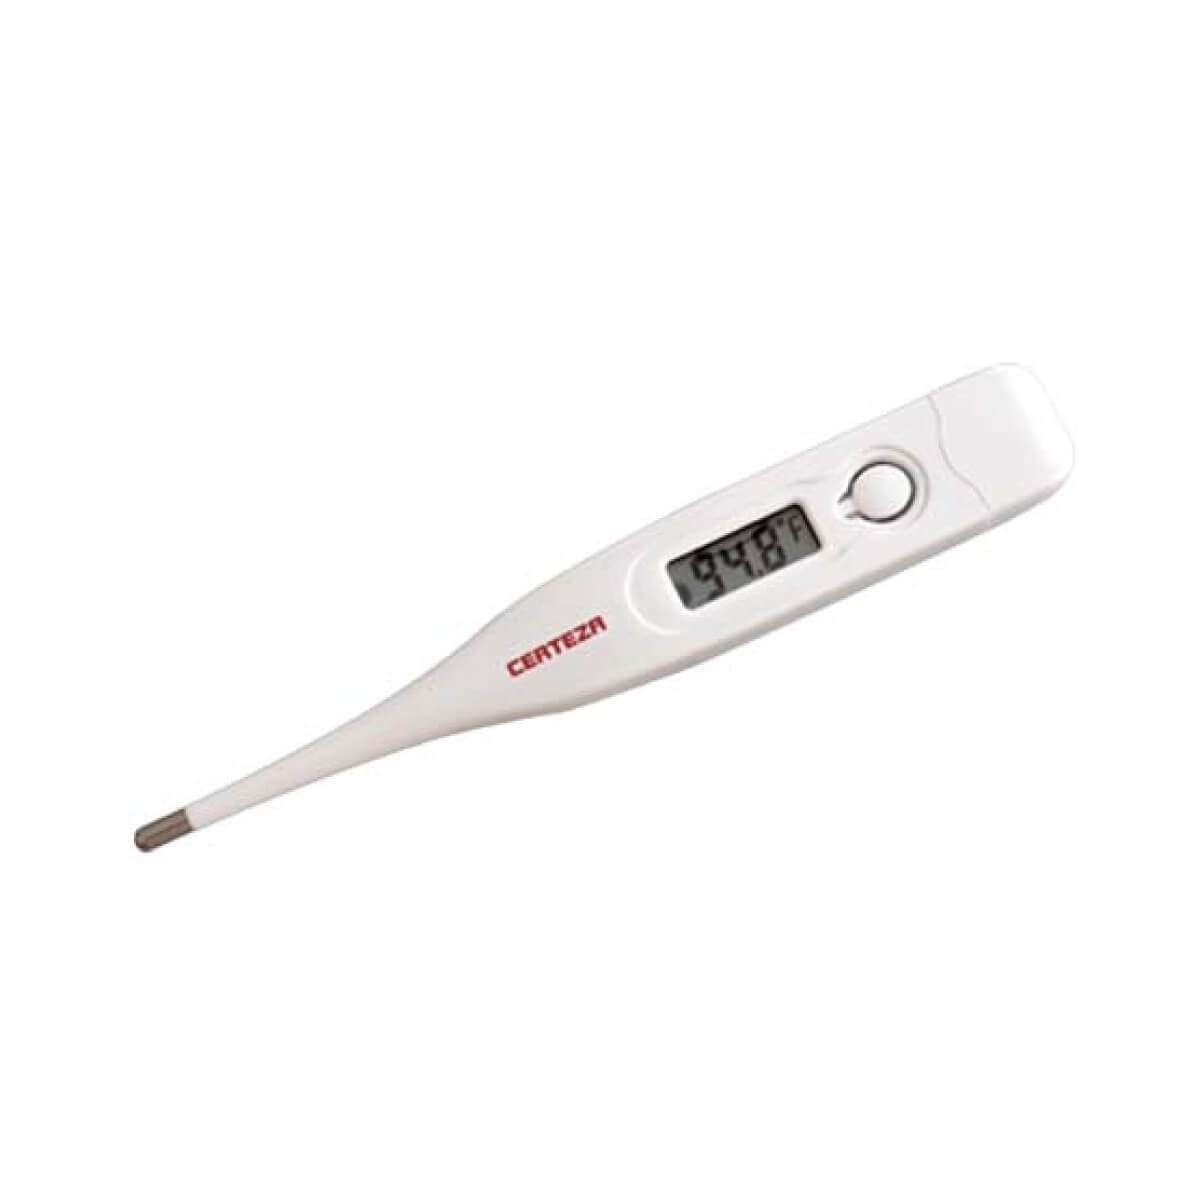 Best digital thermometer in Pakistan